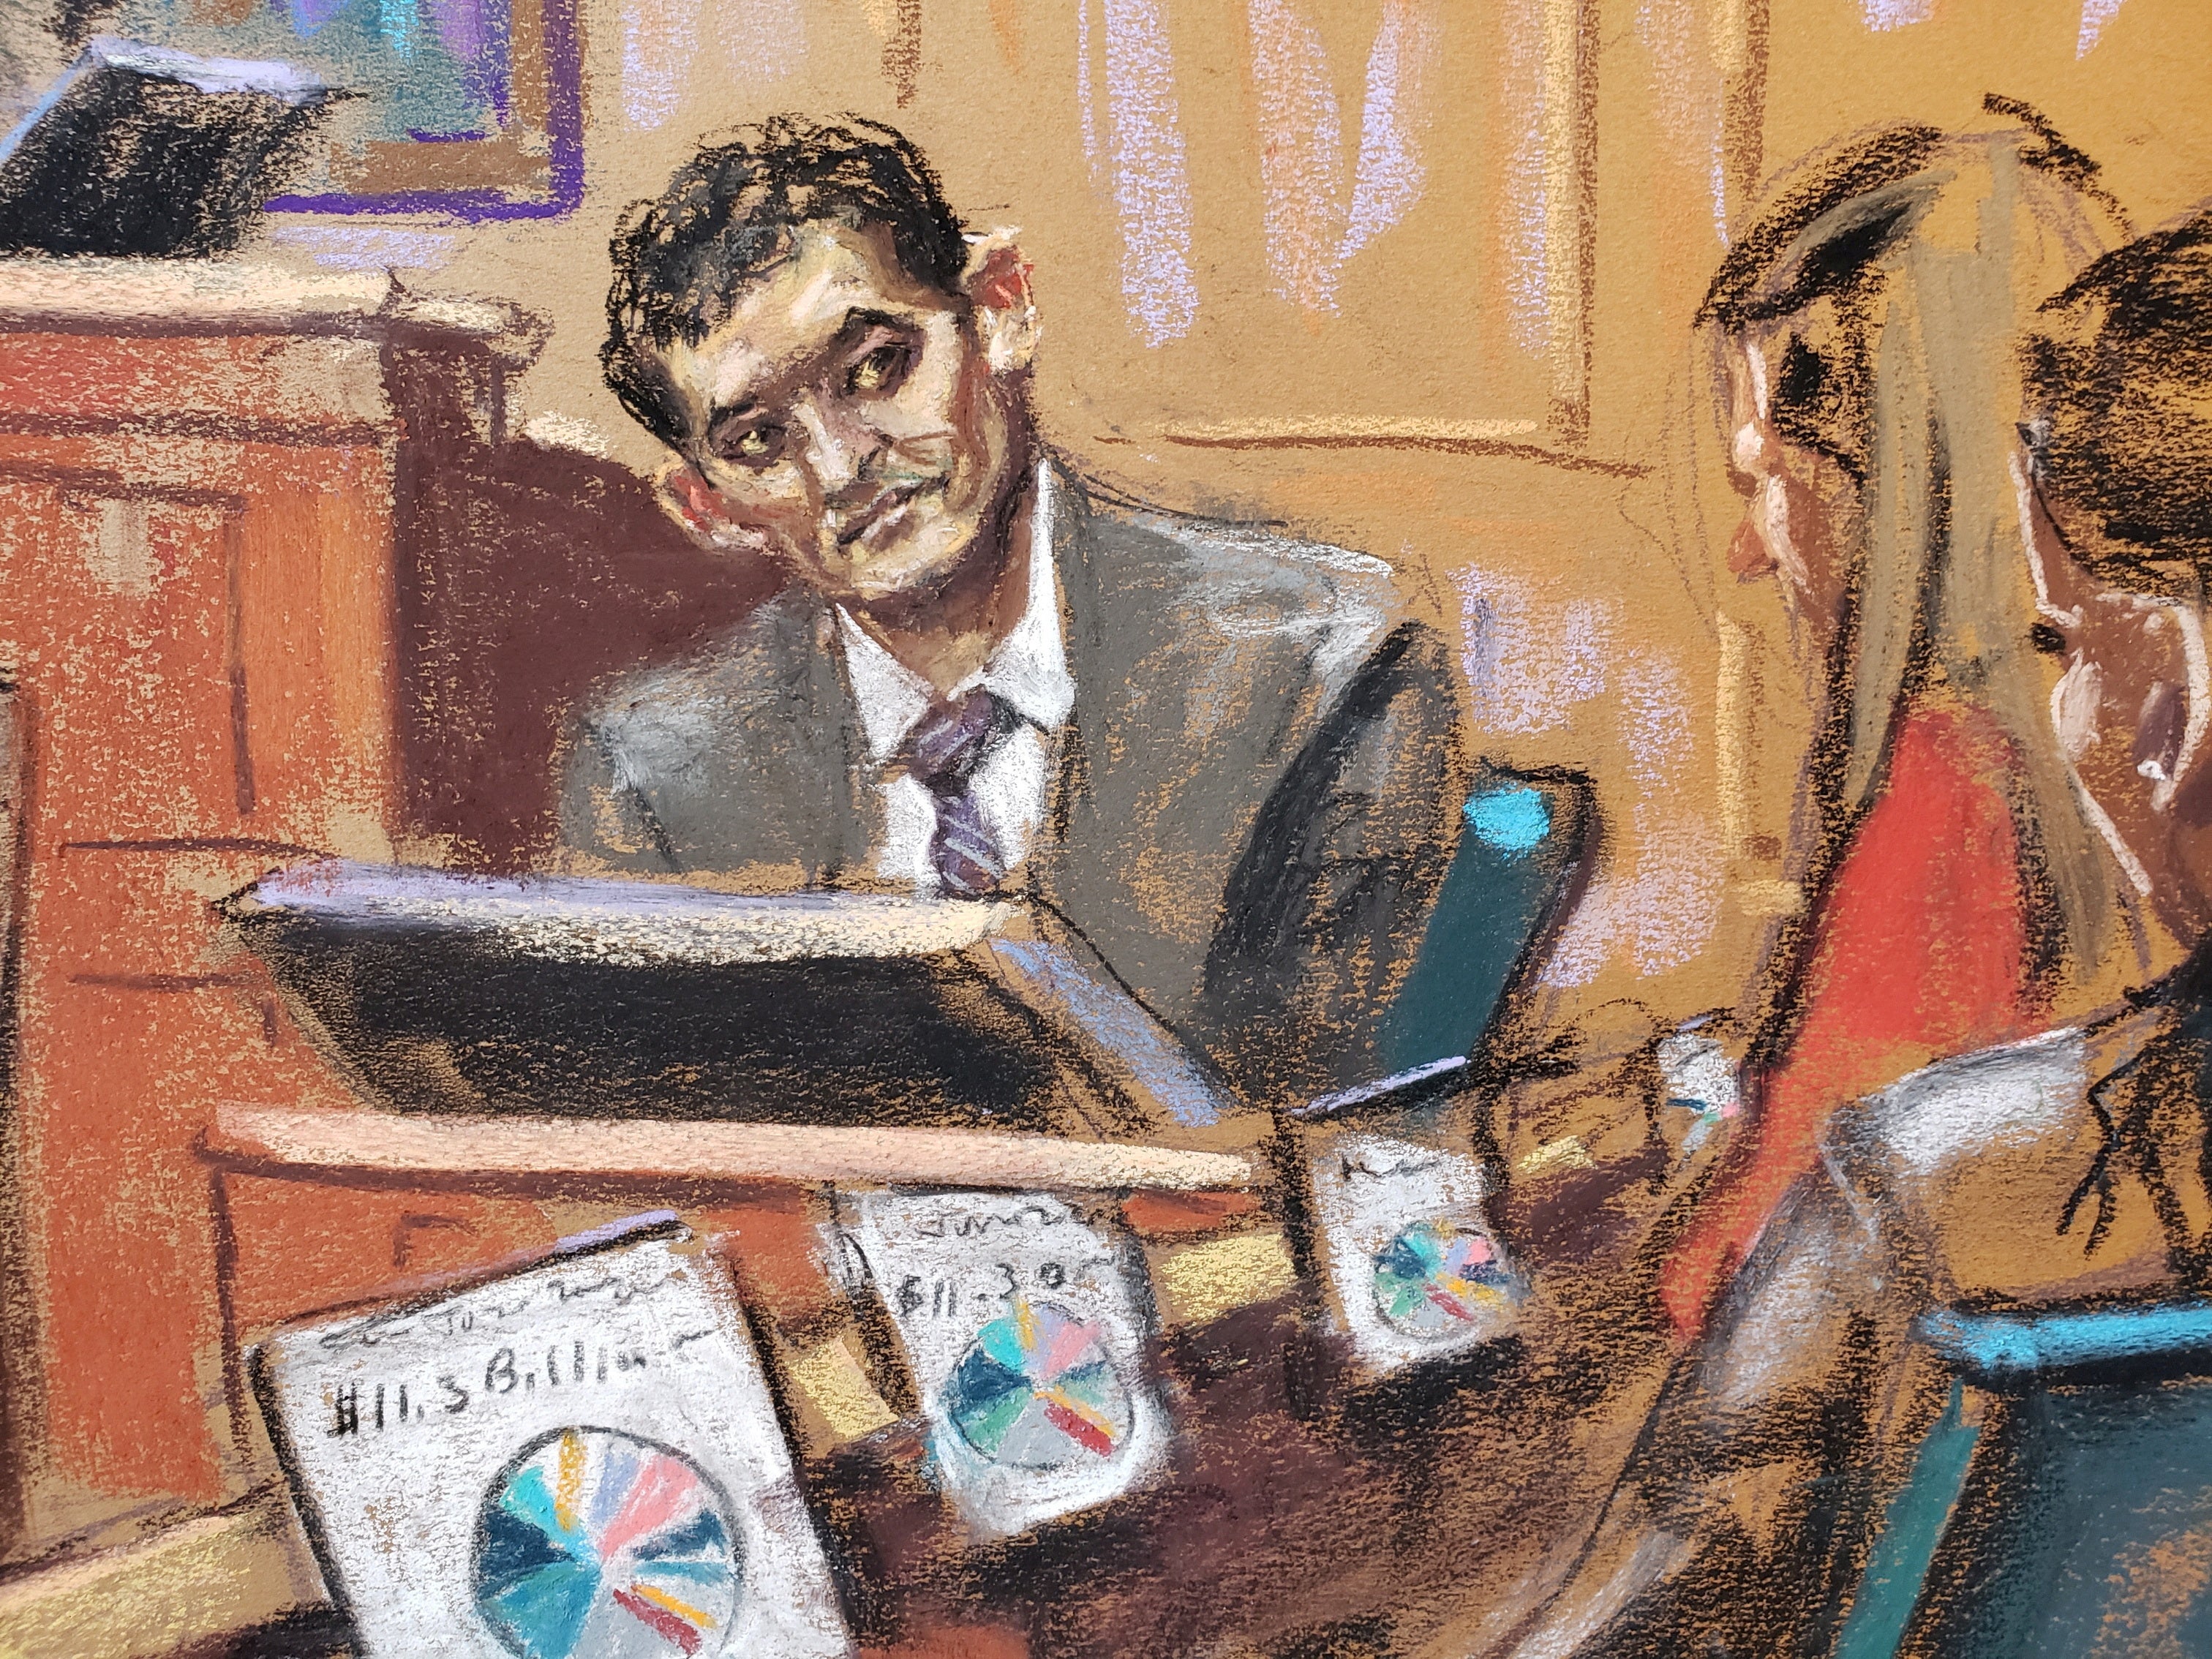 FTX founder Sam Bankman-Fried is questioned by prosecutor Danielle Sassoon (not seen) during his fraud trial over the collapse of the bankrupt cryptocurrency exchange at federal court in New York City, U.S., October 31, 2023 in this courtroom sketch